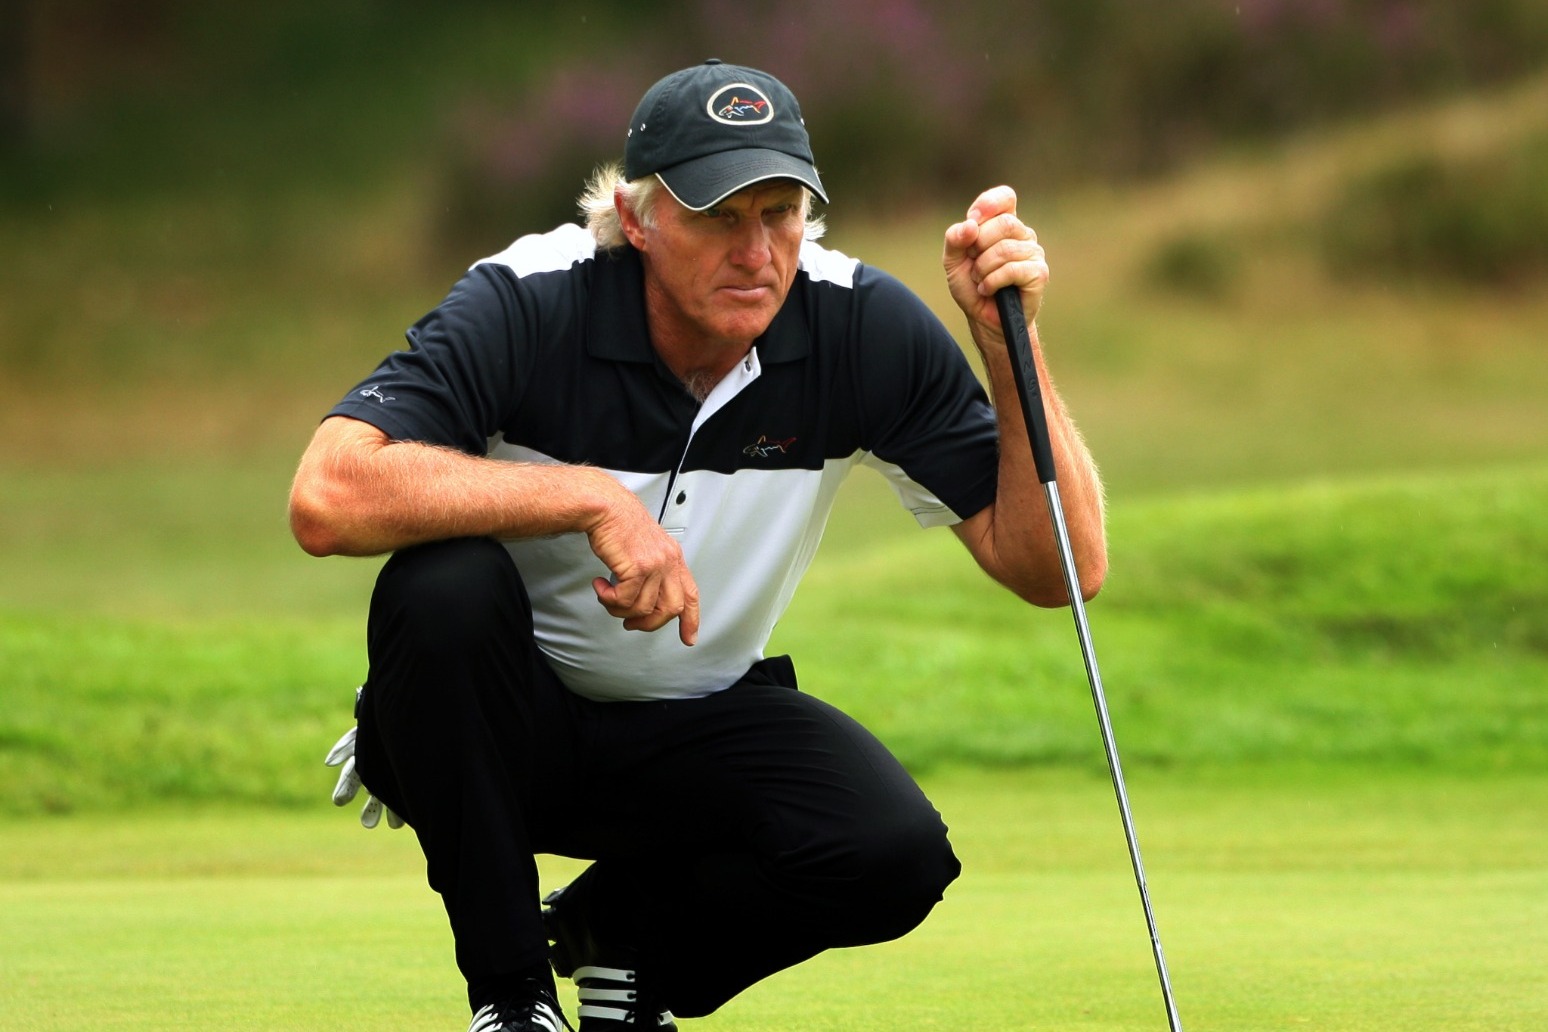 Amnesty condemns ‘seriously misguided’ comments from Greg Norman 